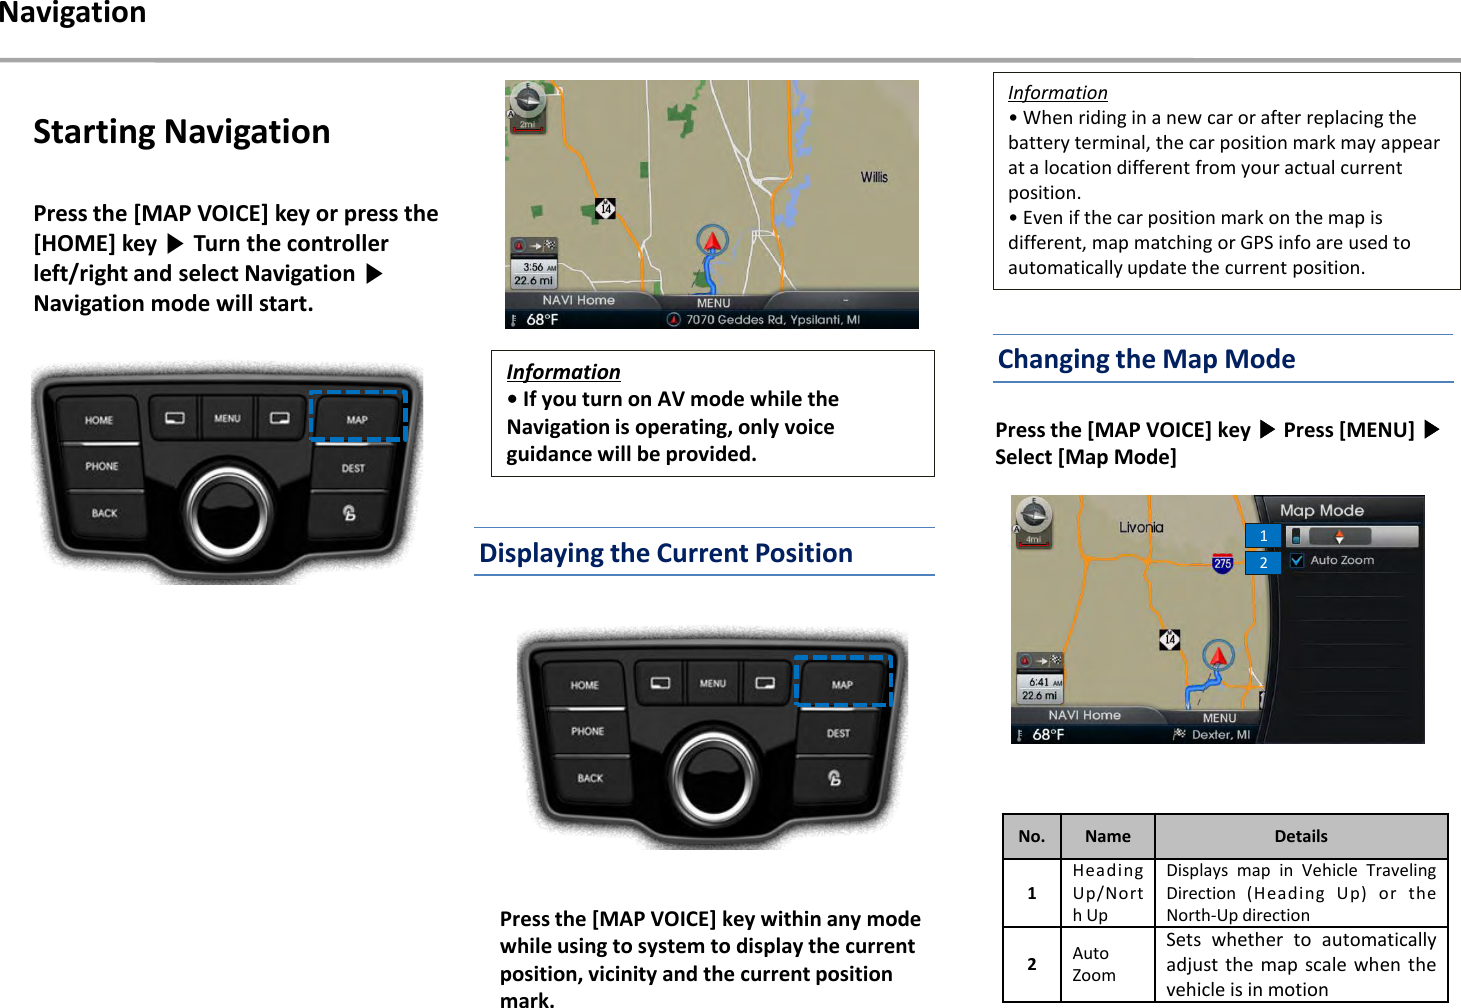 Press the [MAP VOICE] key within any mode while using to system to display the current position, vicinity and the current position mark. Information• When riding in a new car or after replacing the battery terminal, the car position mark may appear at a location different from your actual current position.• Even if the car position mark on the map is different, map matching or GPS info are used to automatically update the current position.NavigationPress the [MAP VOICE] key or press the [HOME] key ▶Turn the controller left/right and select Navigation ▶Navigation mode will start.Starting NavigationInformation• If you turn on AV mode while the Navigation is operating, only voice guidance will be provided. Press the [MAP VOICE] key ▶Press [MENU] ▶Select [Map Mode]12No. Name Details1HeadingUp/NorthUpDisplays map in Vehicle TravelingDirection (Heading Up)or theNorth-Up direction2AutoZoomSets whether to automaticallyadjust the map scale when thevehicle is in motionDisplaying the Current PositionChanging the Map Mode